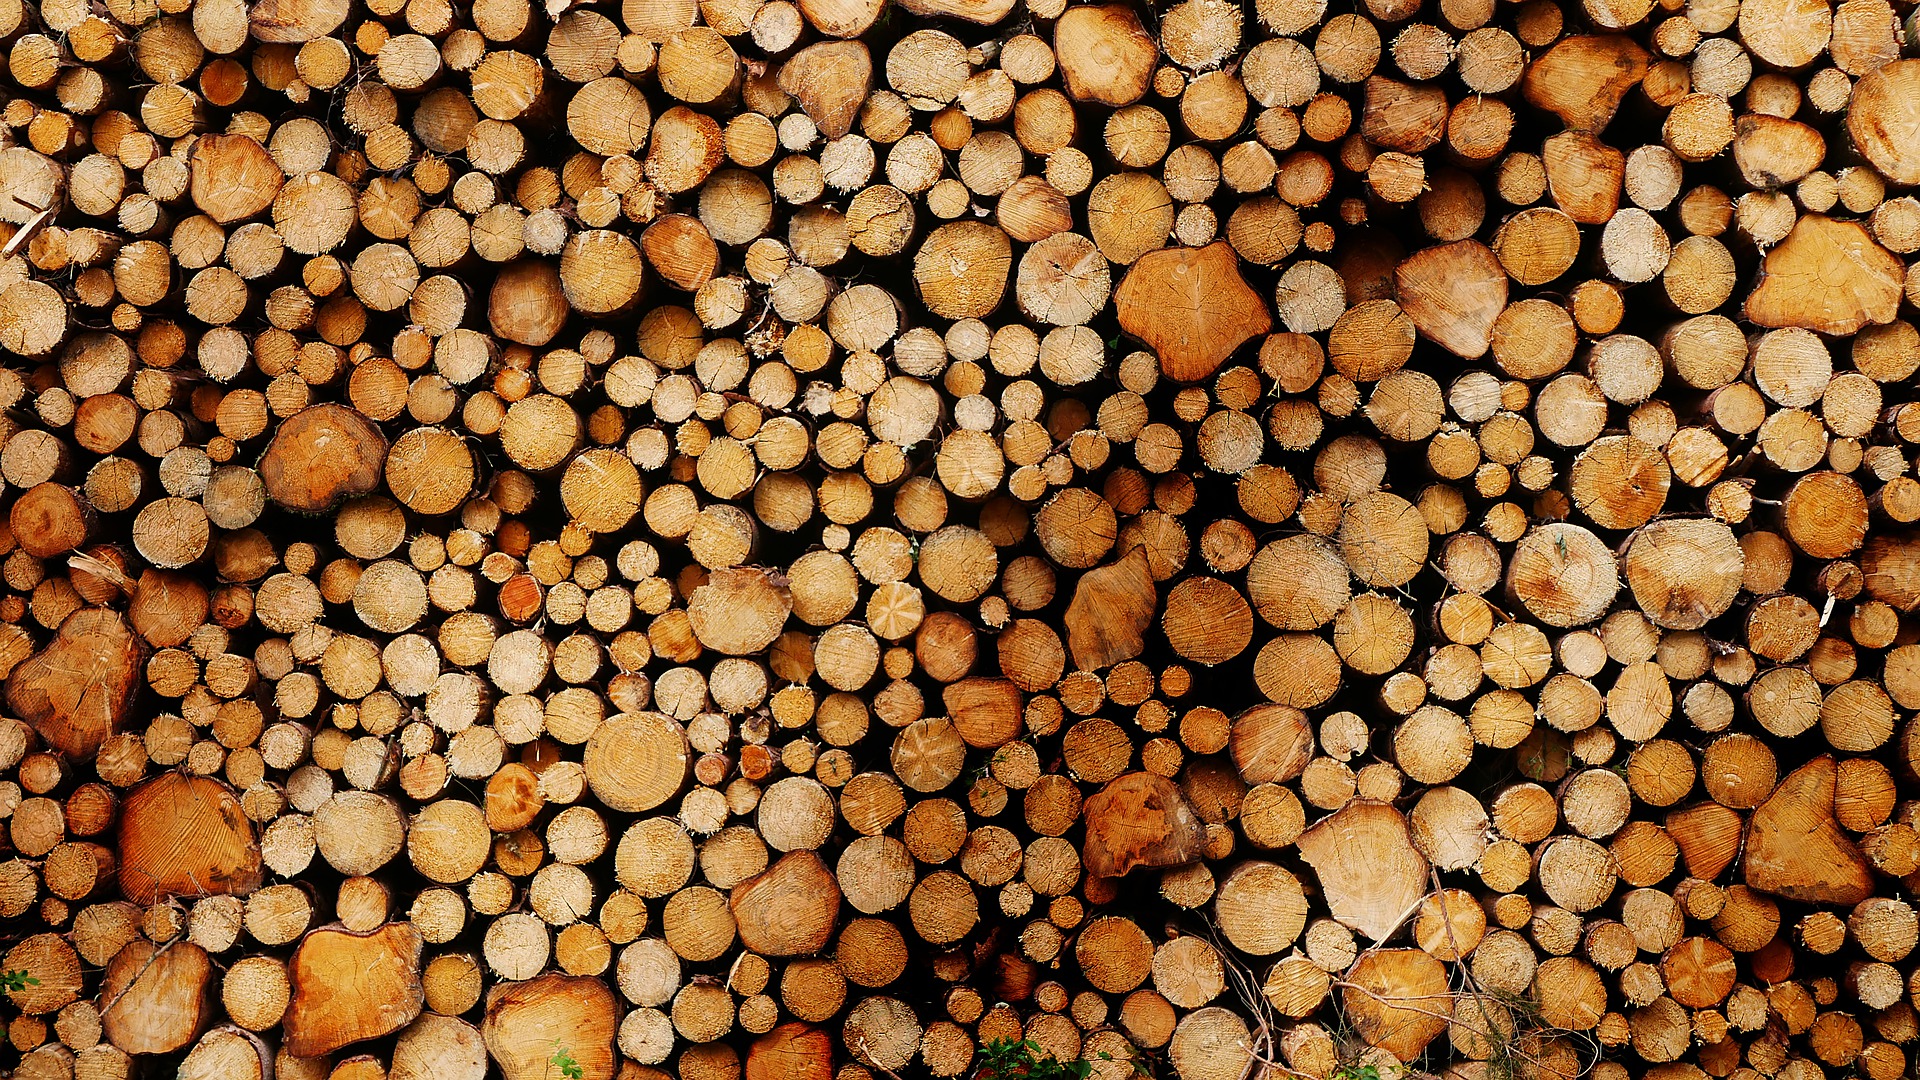 A pile of logs